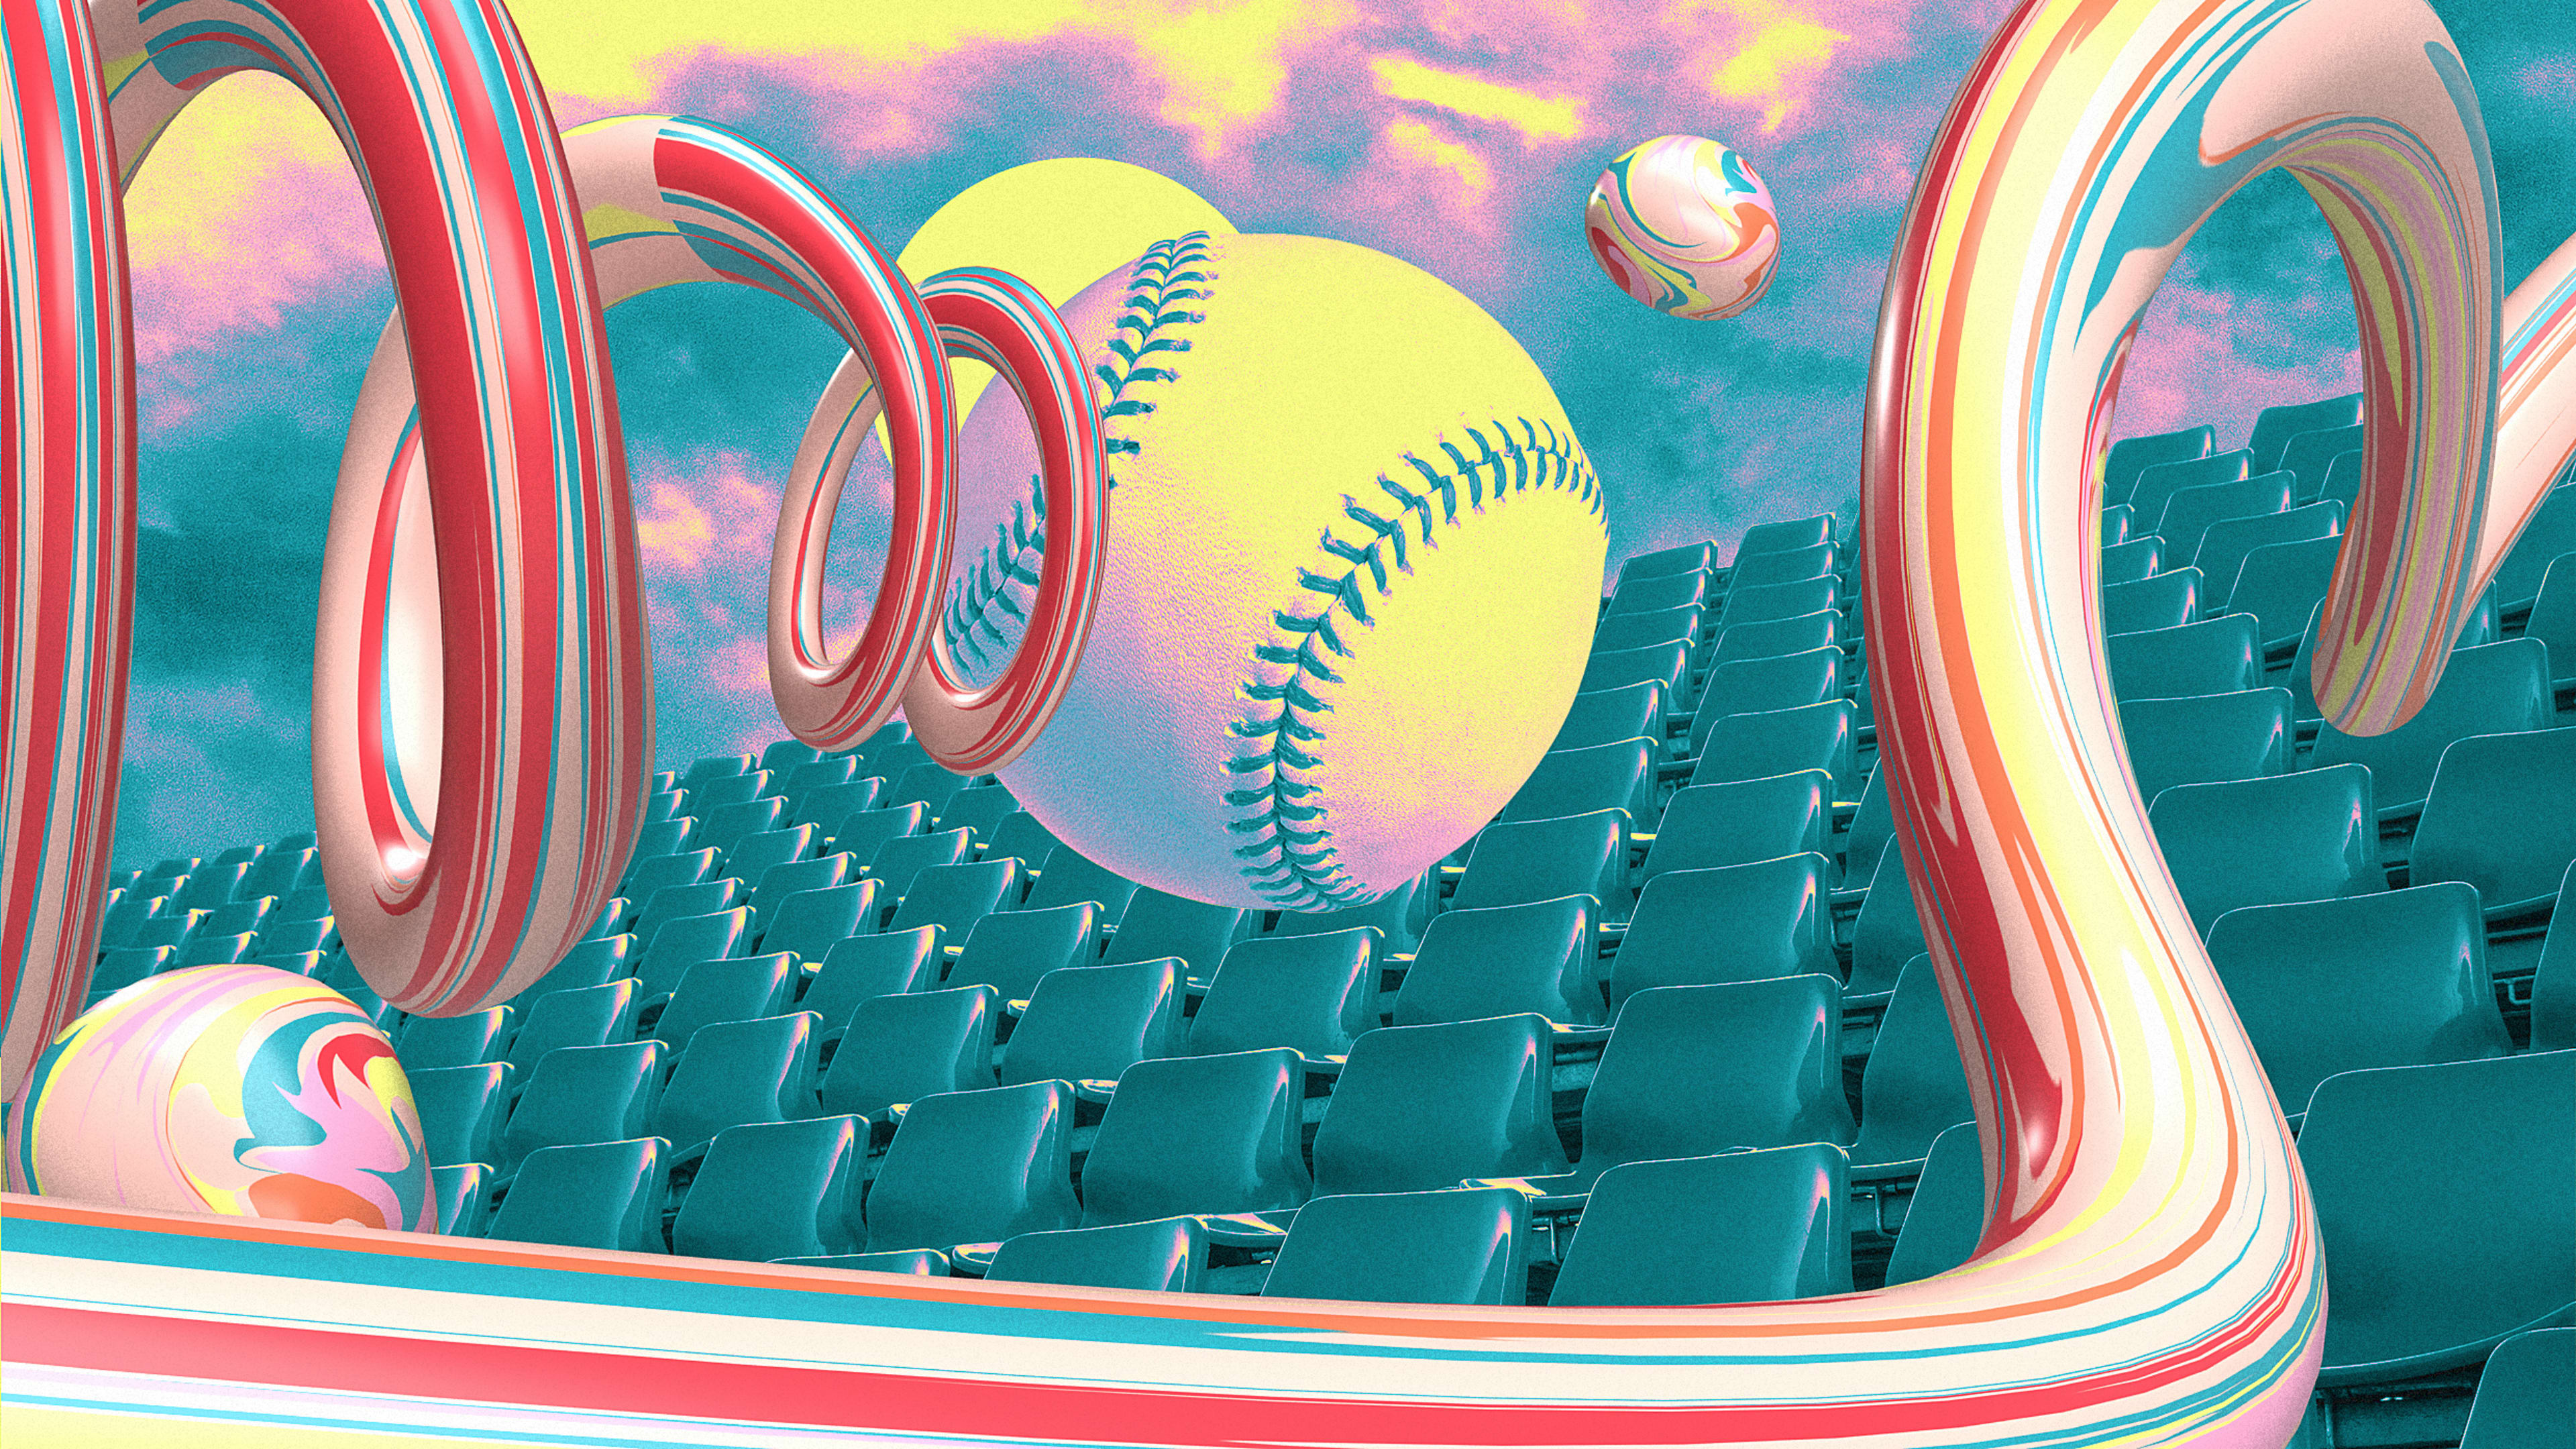 MLB’s Chris Marinak on how COVID-19 is changing the fan experience